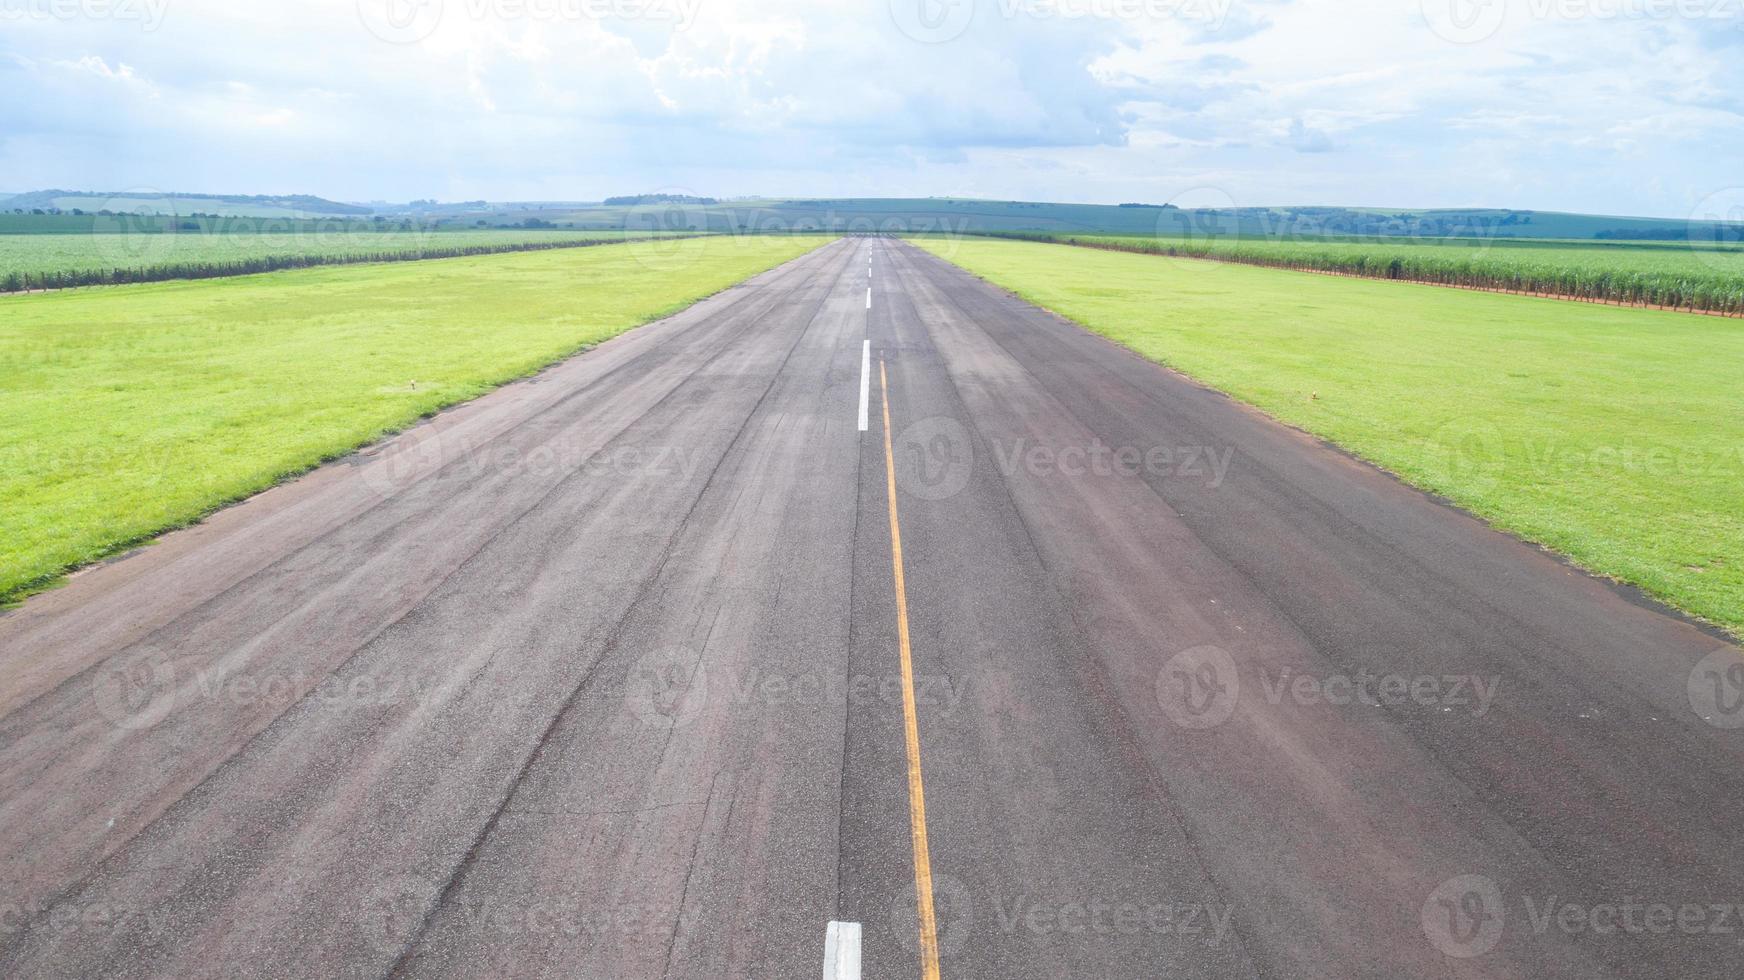 Aerial view of paved airplane runway on Brazil. Small propeller airplanes remote airstrip with Sugar Cane plantation in background. photo